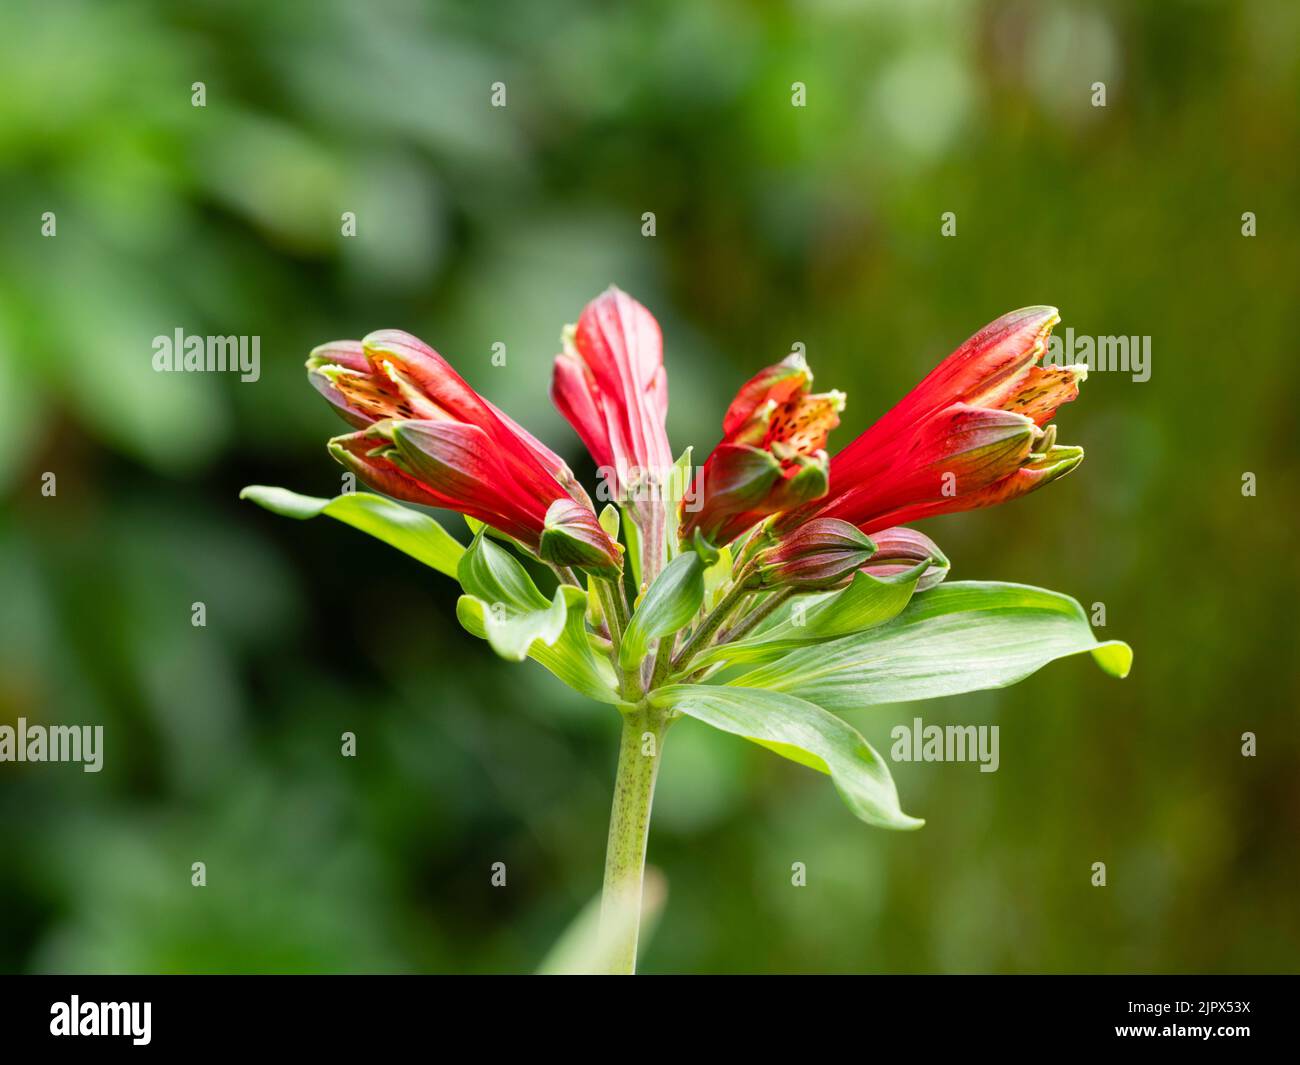 Green tipped red tubular flowers of the half-hardy exotic perennial parrot lily, Alstroemeria psittacina Stock Photo